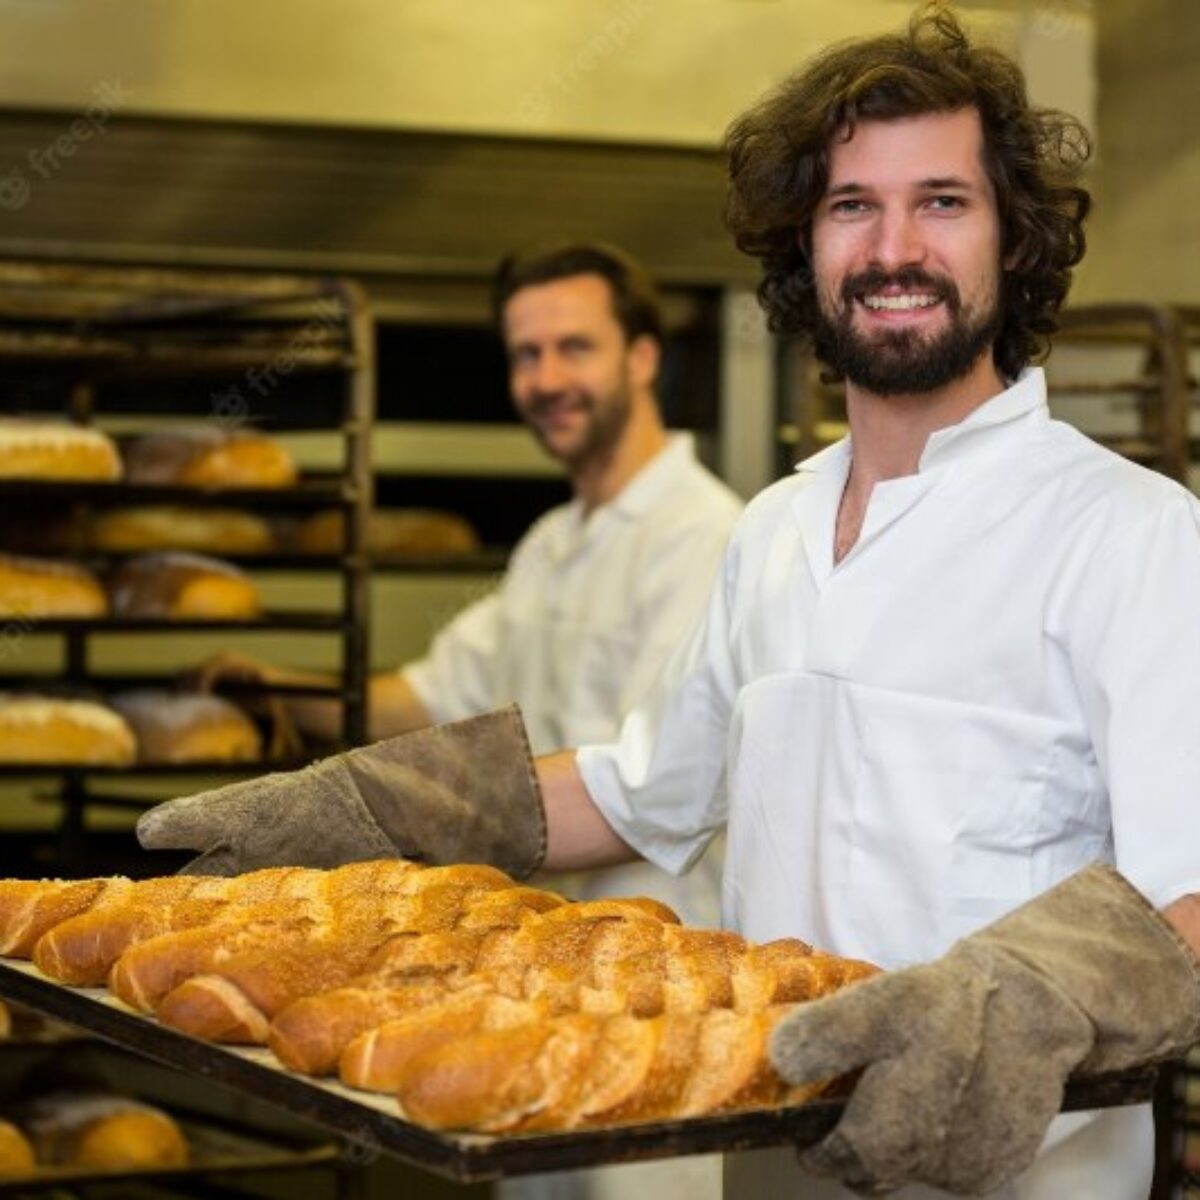 smiling-baker-carrying-tray-freshly-baked-french-baguette_1170-2290